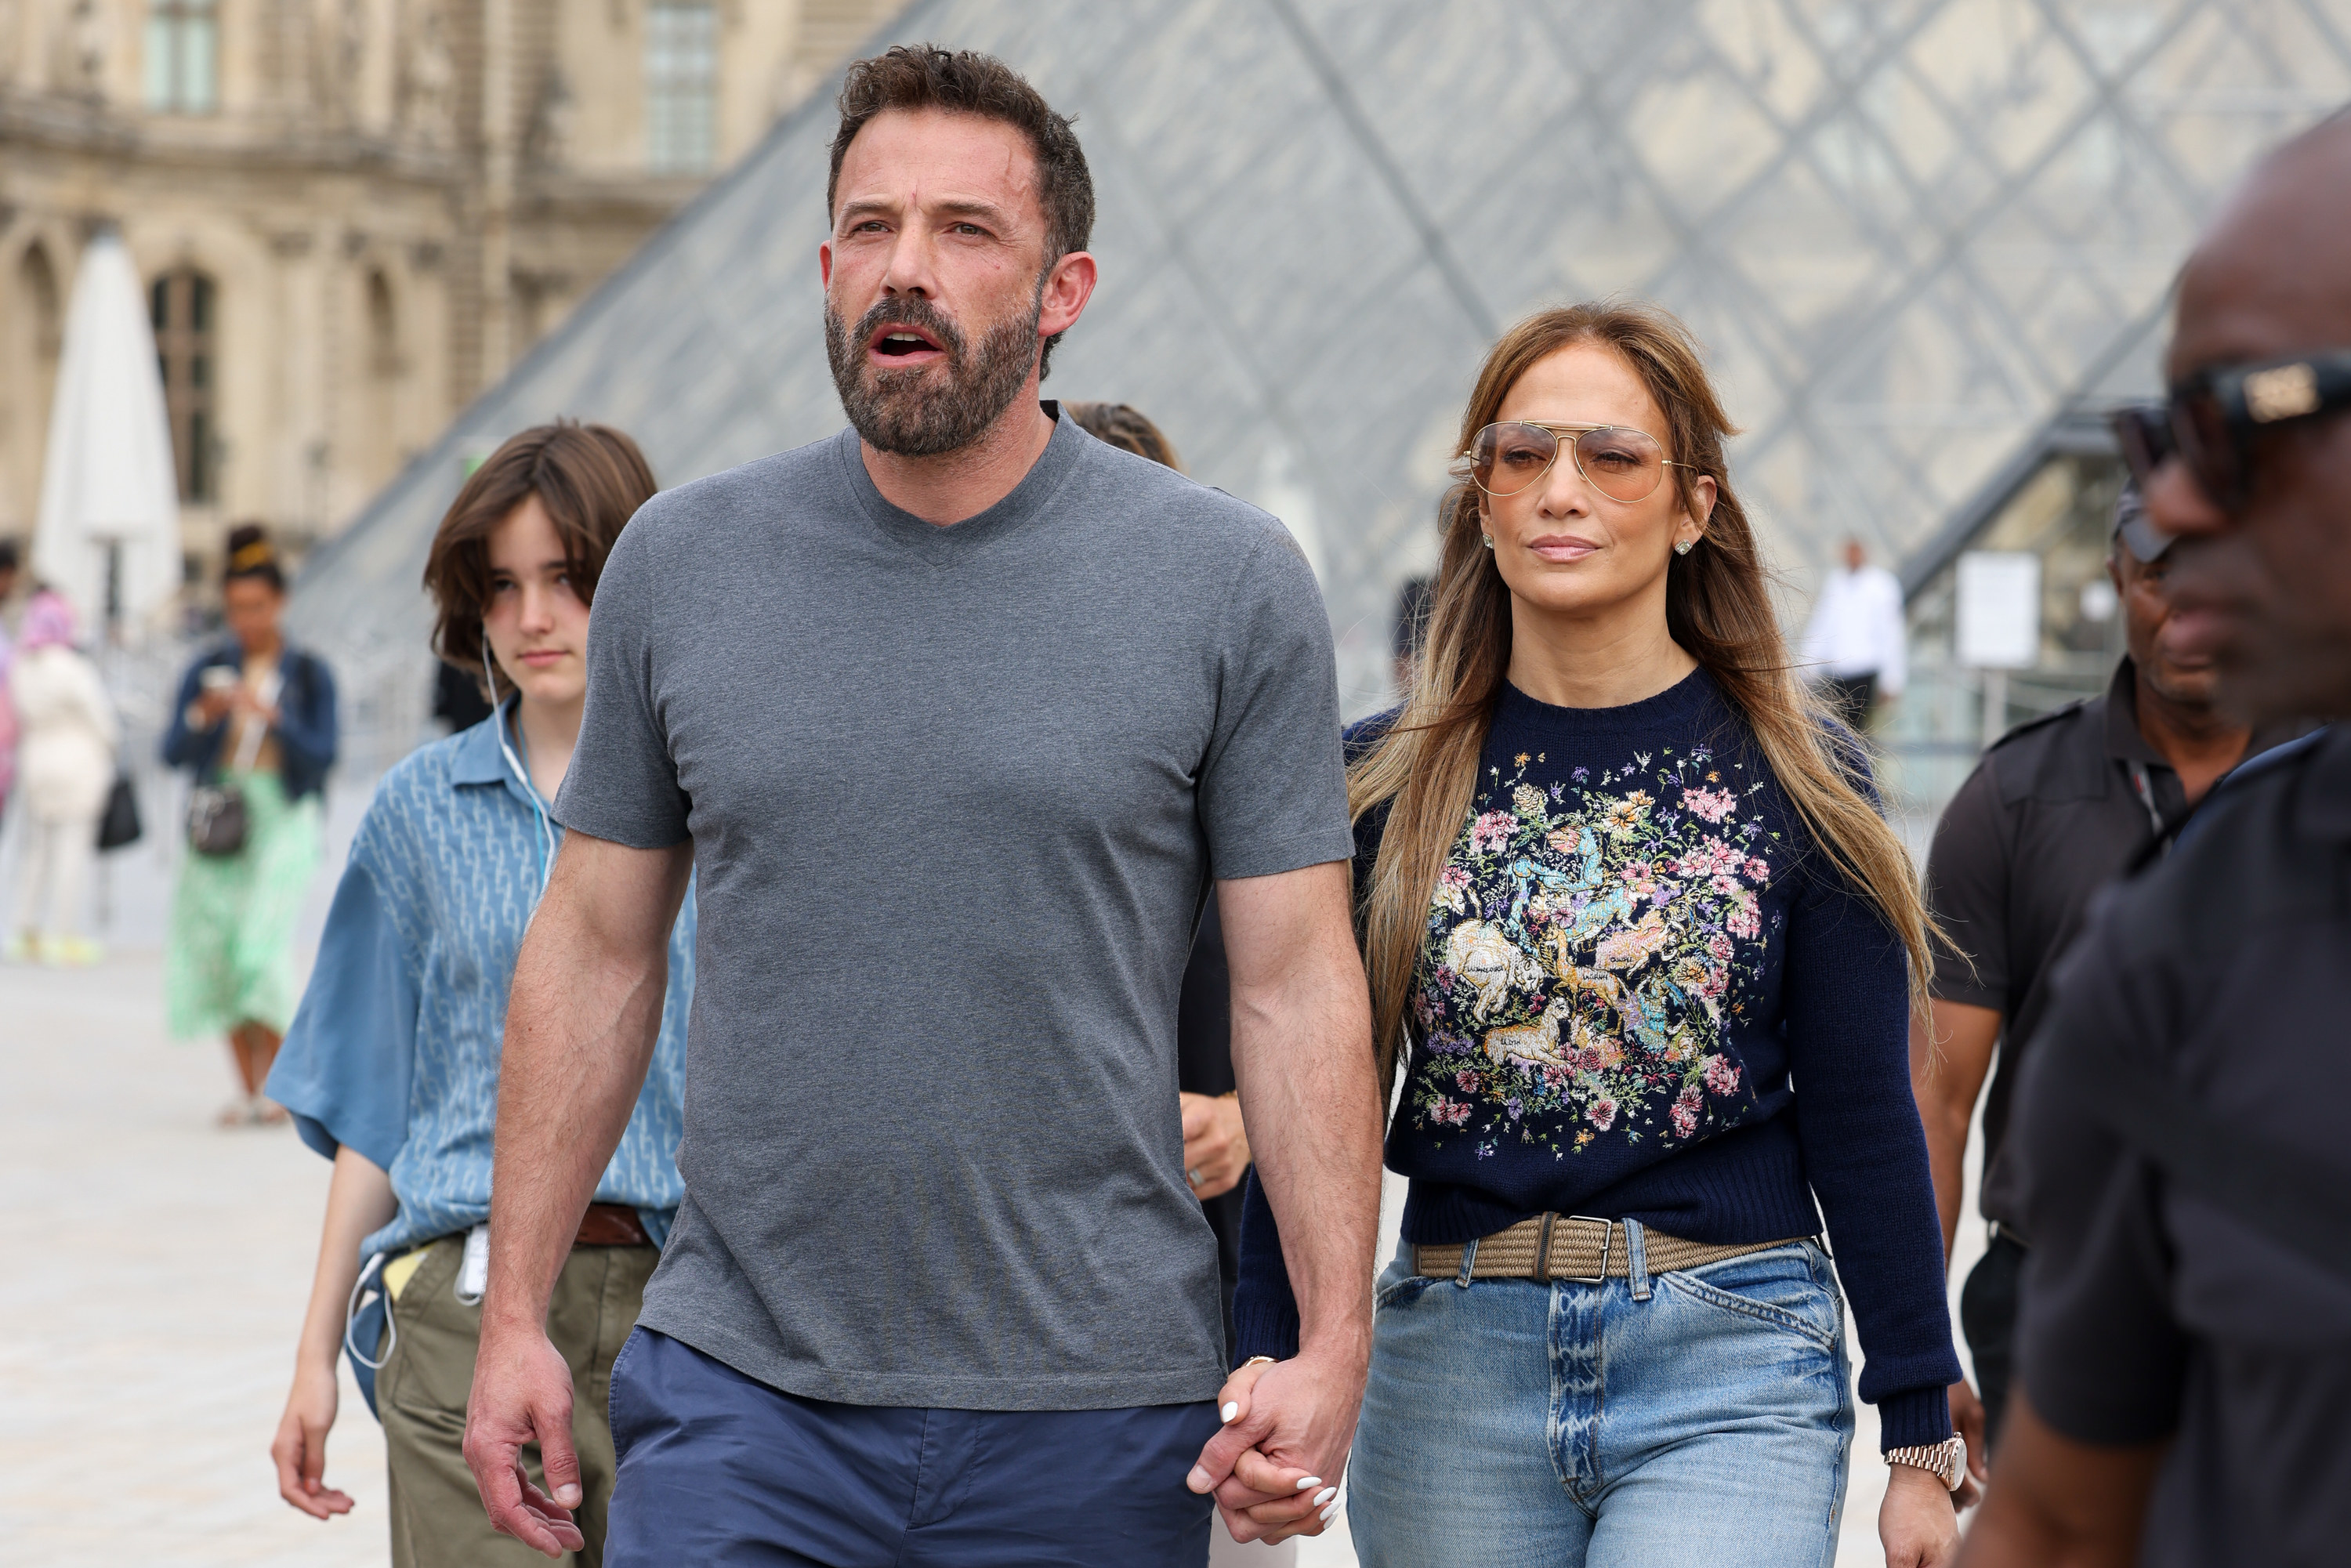 the couple holding hands in paris